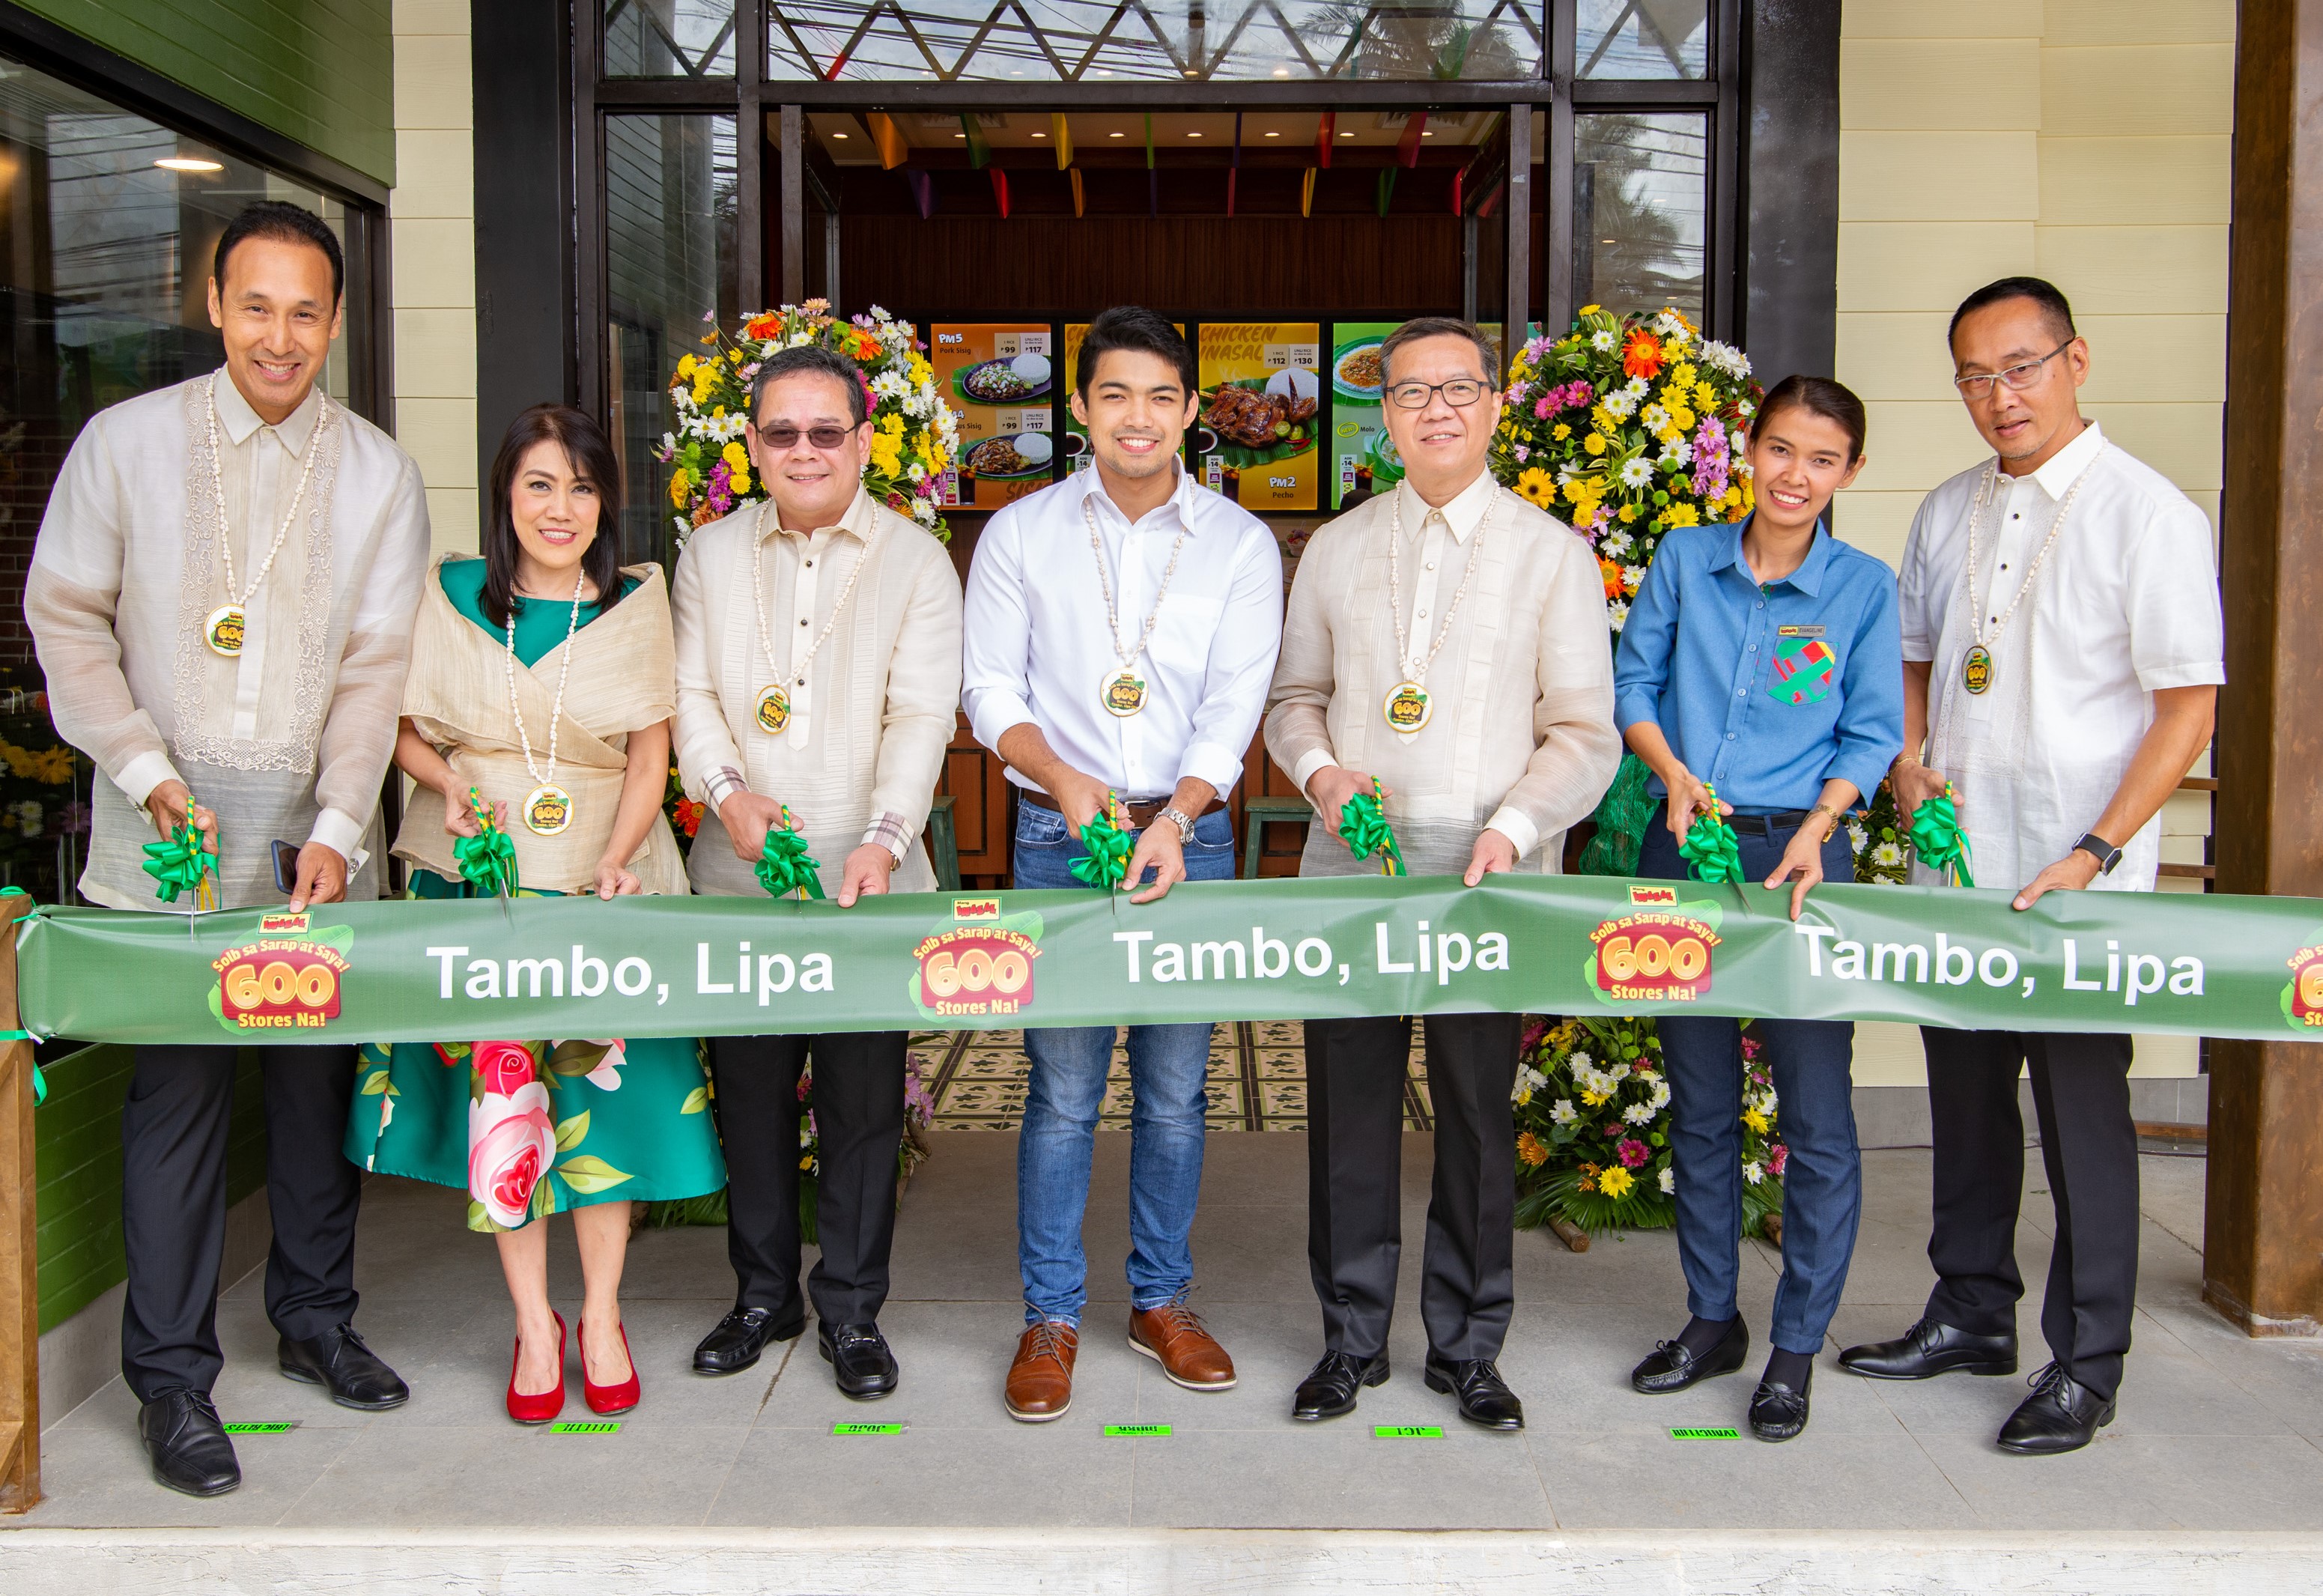 Lipa City Vice Mayor Mark Aries Luancing (center) leads the ribbon-cutting ceremony of Mang Inasal’s (MI) 600th store in Tambo, Lipa, Batangas. He is accompanied by JFC Country Business Group Head for the Philippines Joseph Tanbuntiong (third from right), MI Business Unit Head Jojo Subido (third from left), and (from left) Franchisee Eric Reyes, MI South Luzon RBU Head Lelette Minerales, Restaurant Manager Evangeline Ebora, and Managing Director Eugene Reyes. 